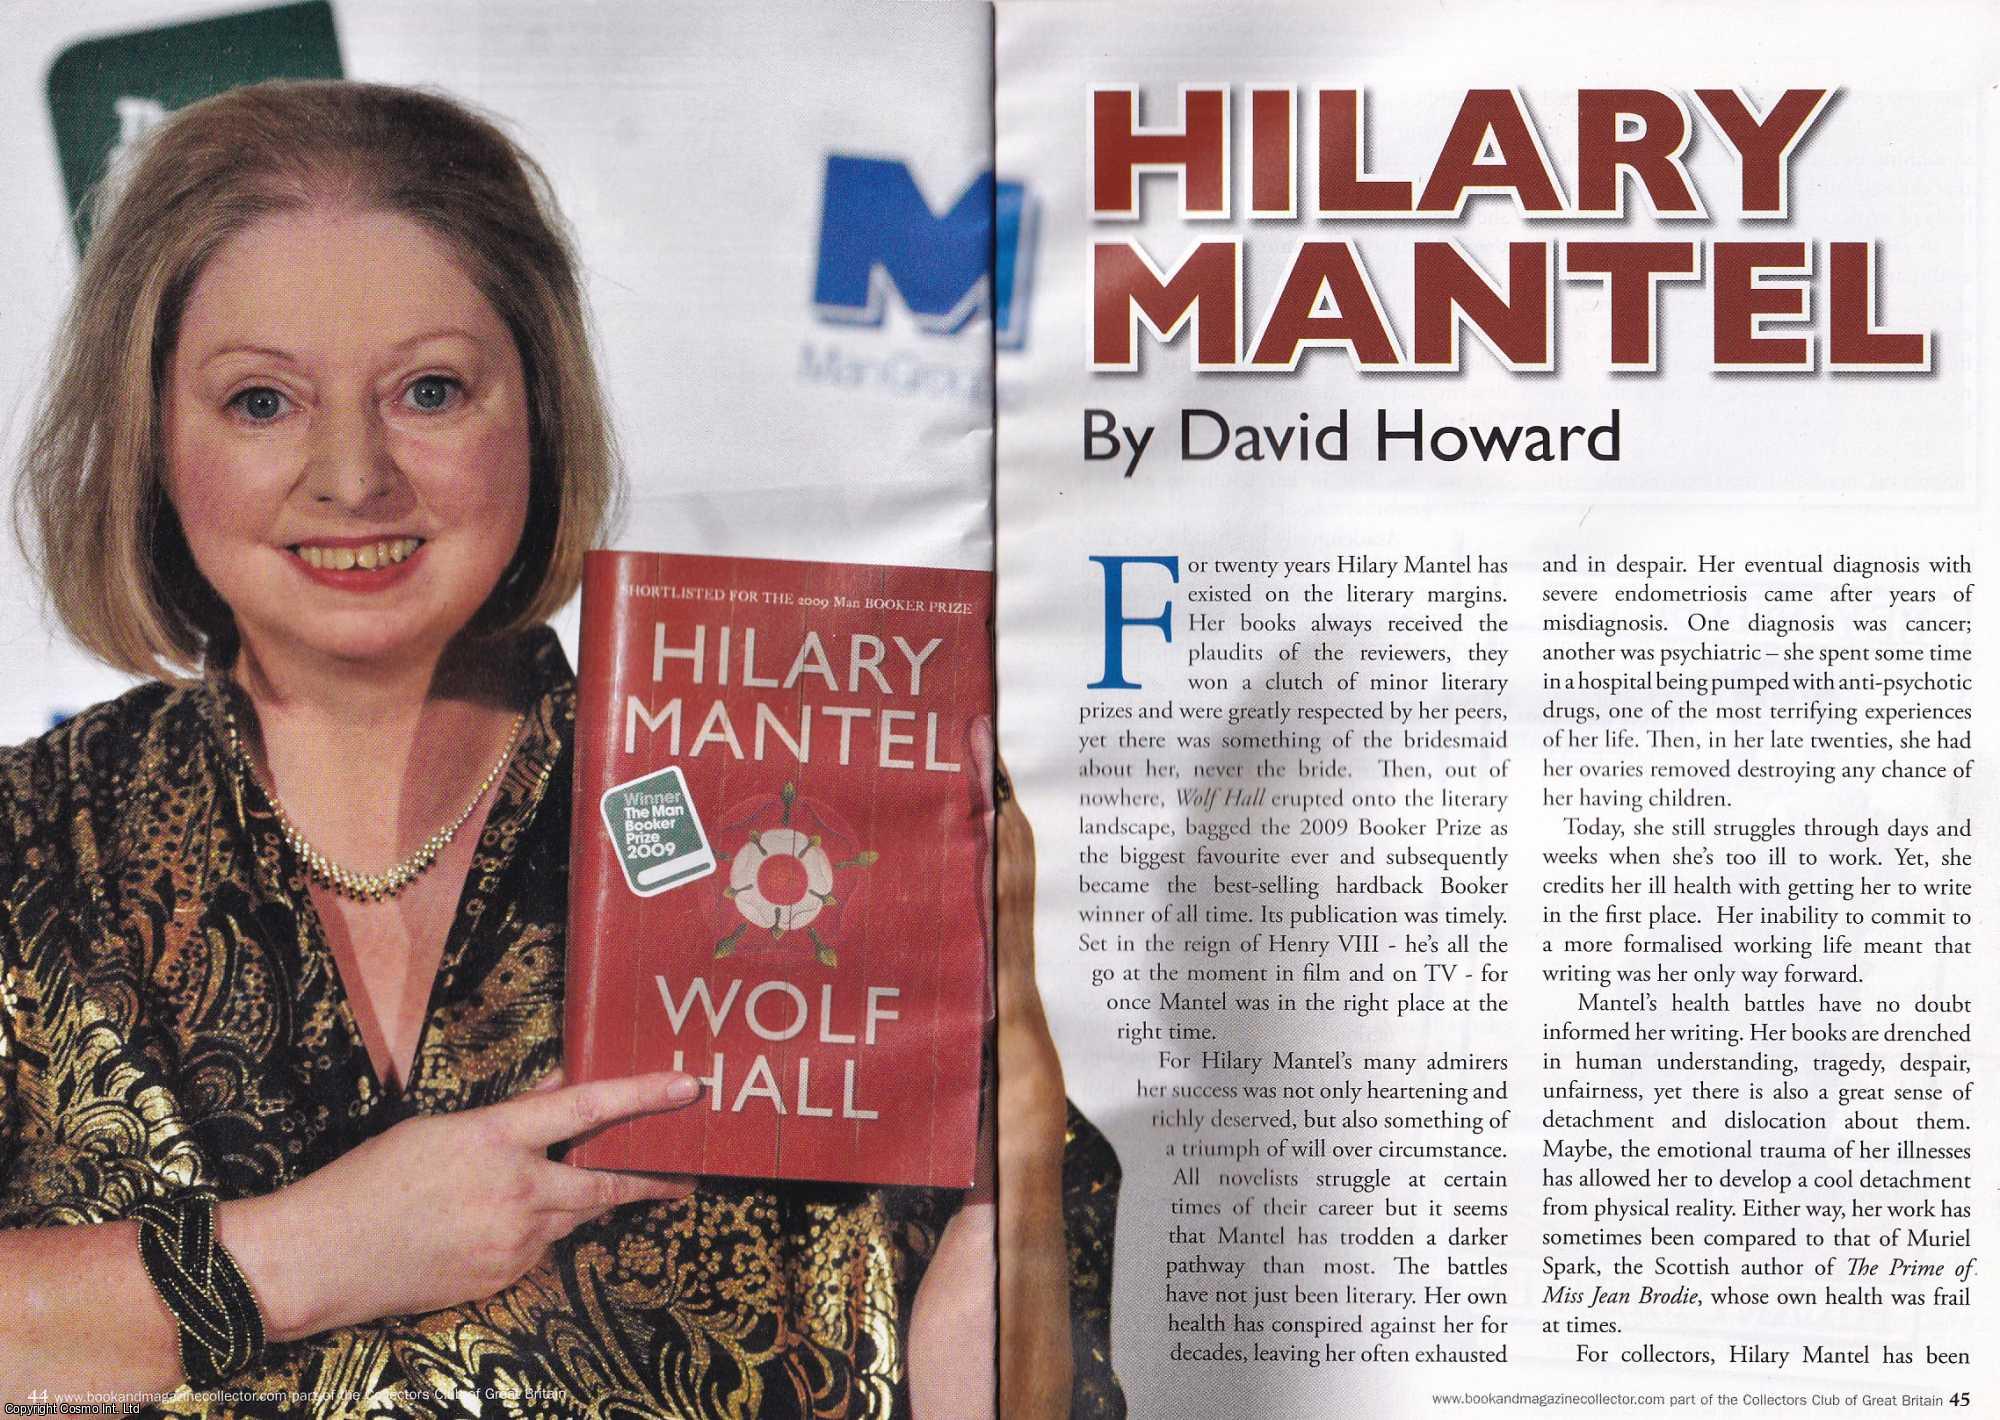 David Howard - Hilary Mantel (writer). This is an original article separated from an issue of The Book & Magazine Collector publication.